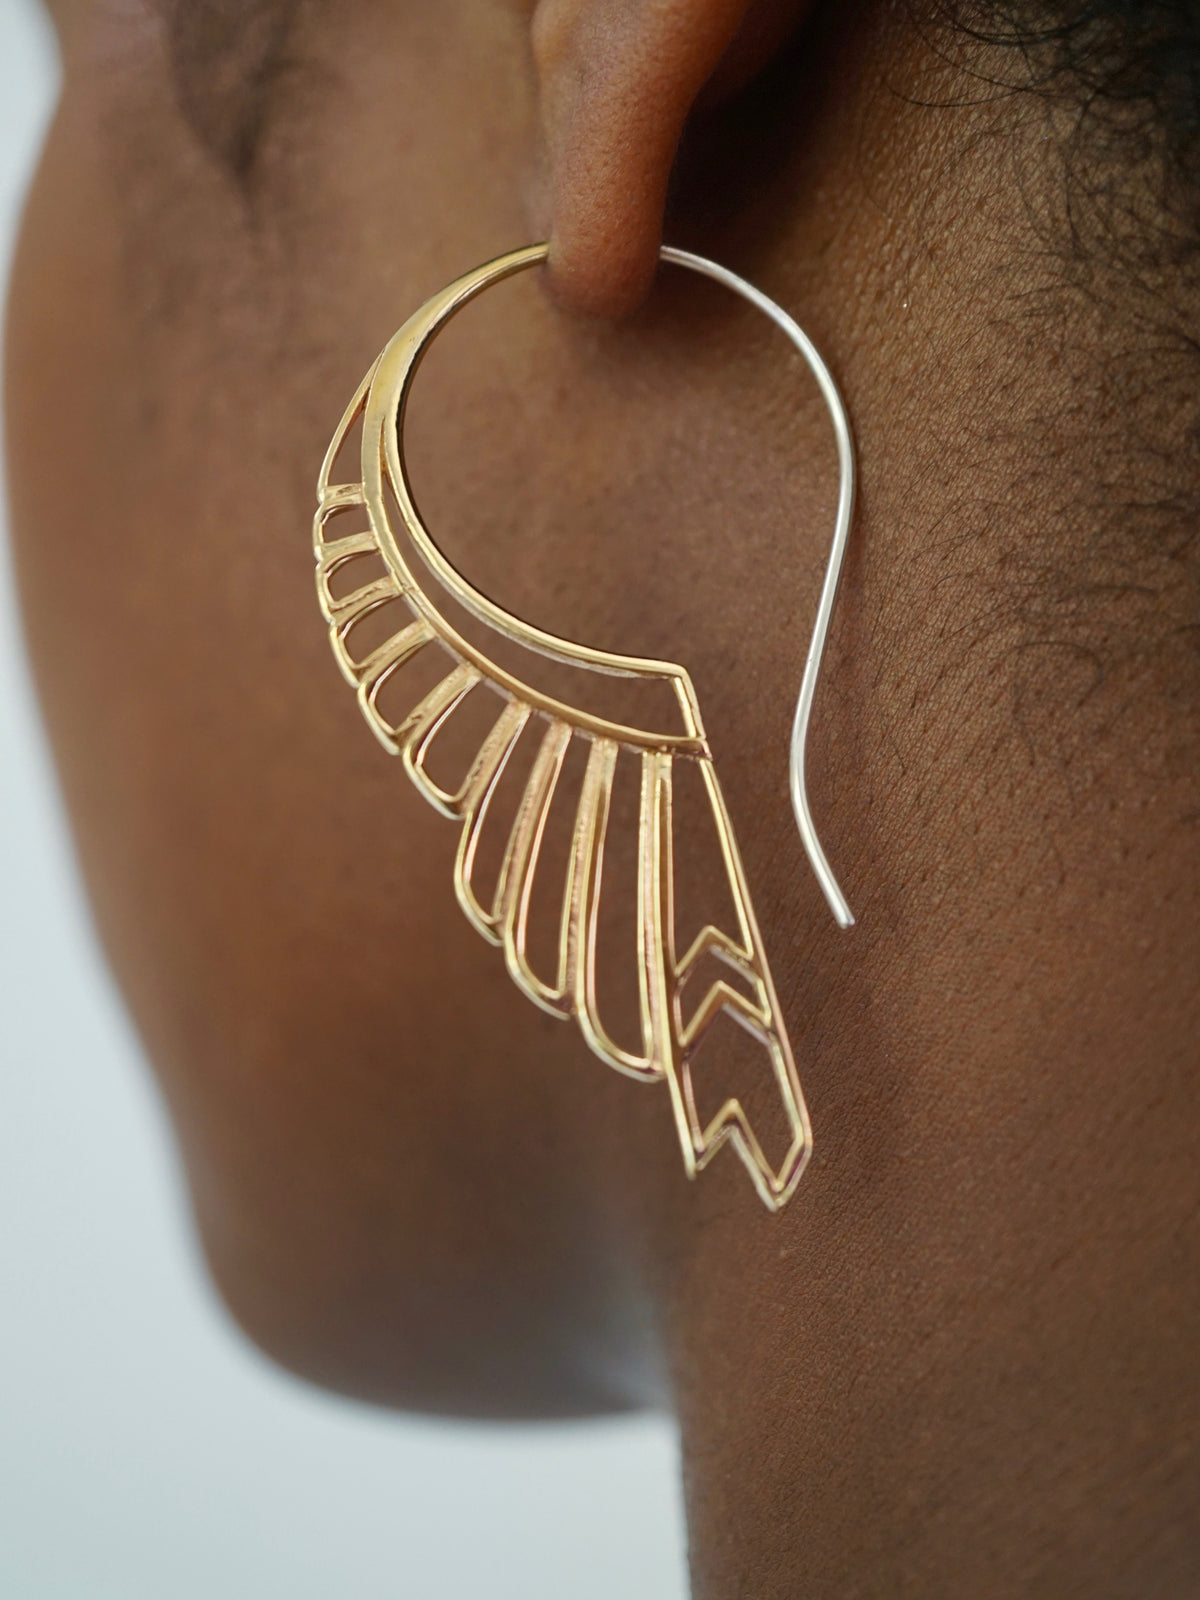 Large Feather Wing Earrings - gold-tone with sterling silver ear-stems - Huntress (b246)